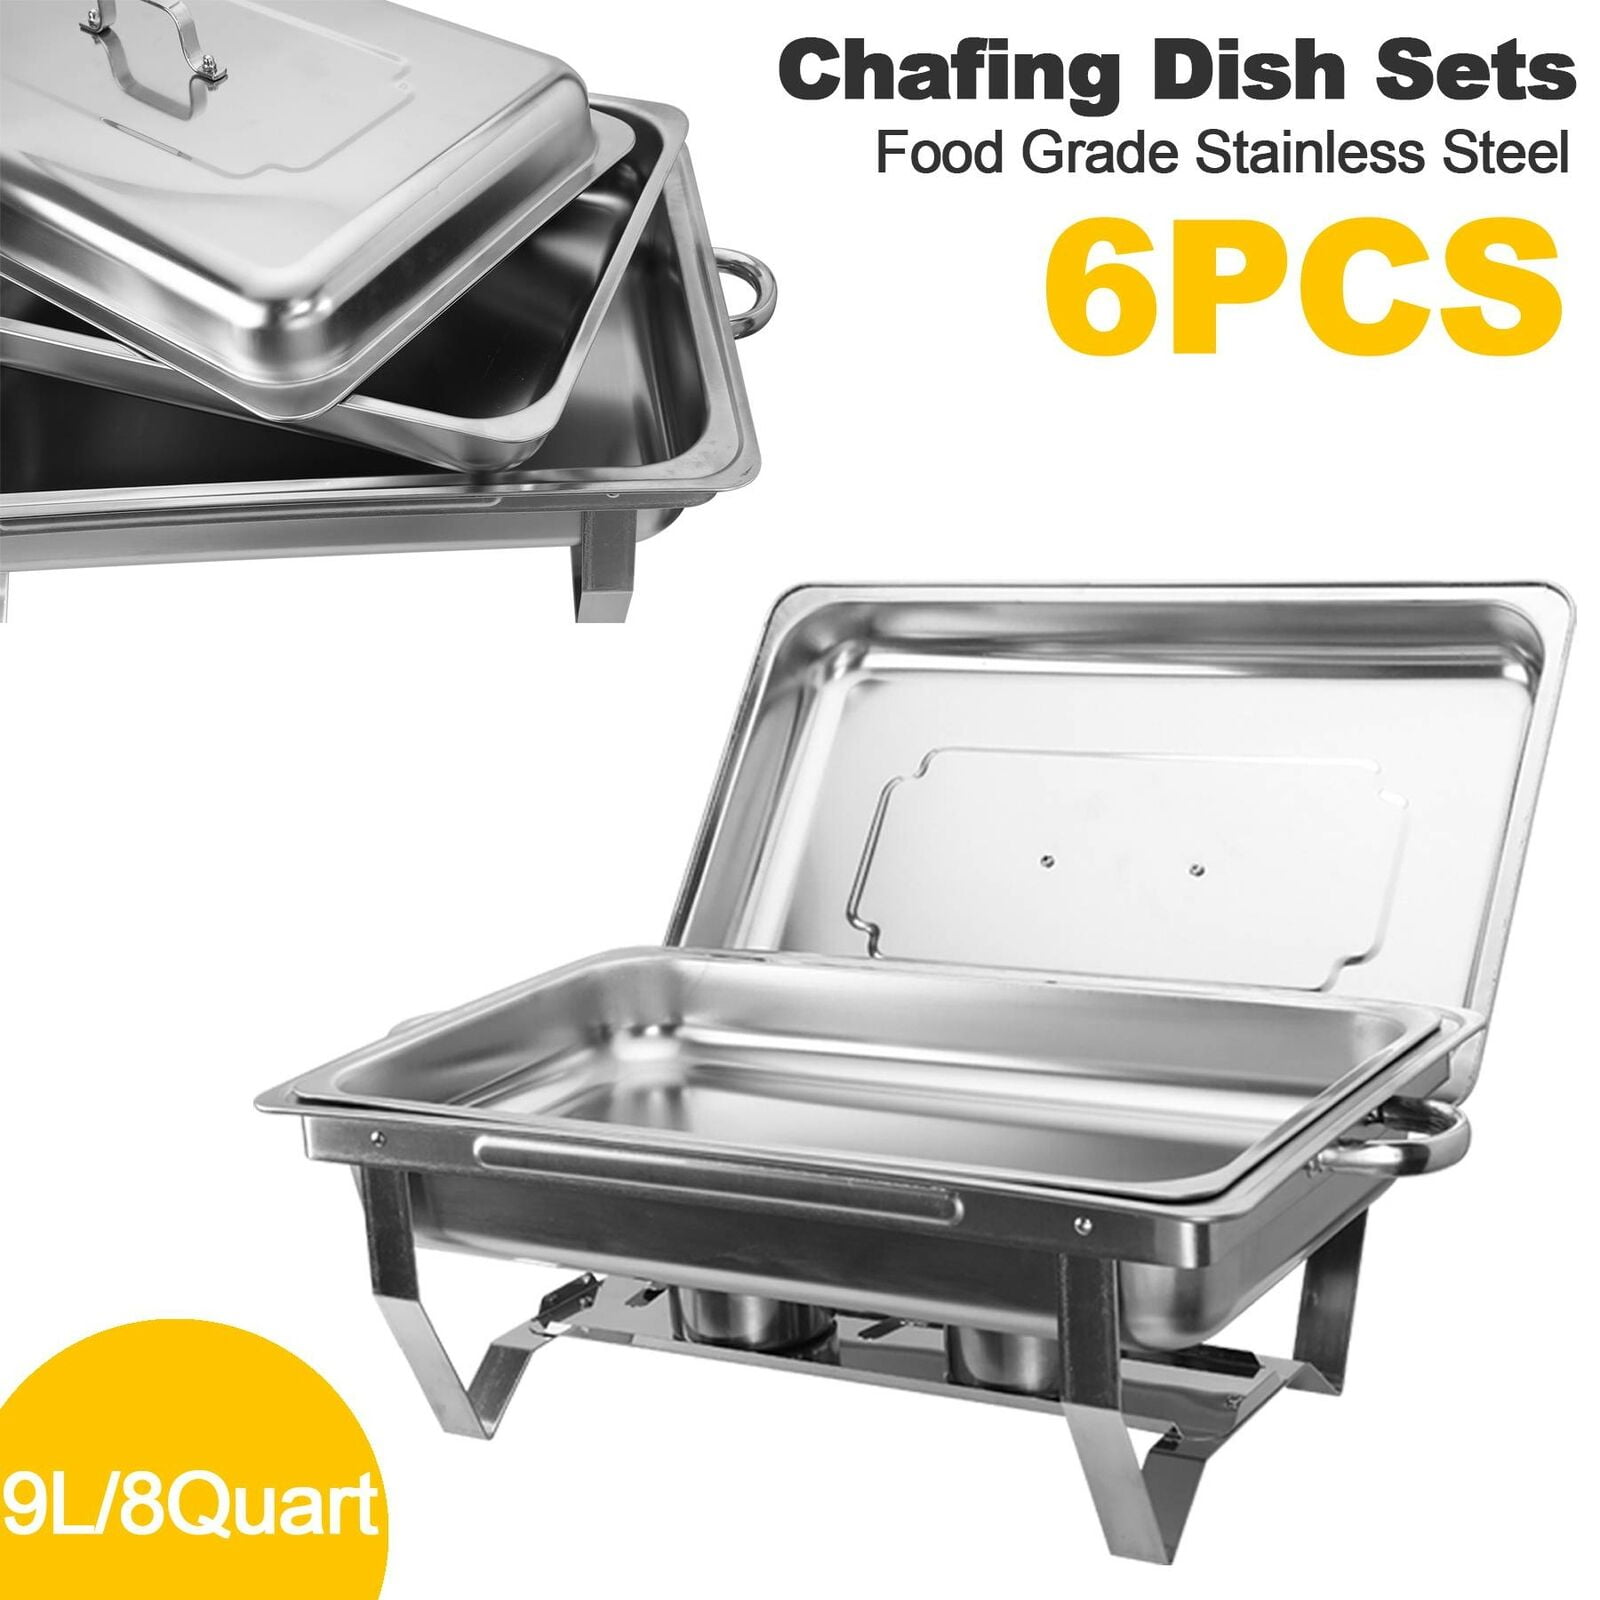 PACK OF 2 STAINLESS STEEL CHAFING DISH SETS WITH 9L FOOD PANS FUEL SPOONS 